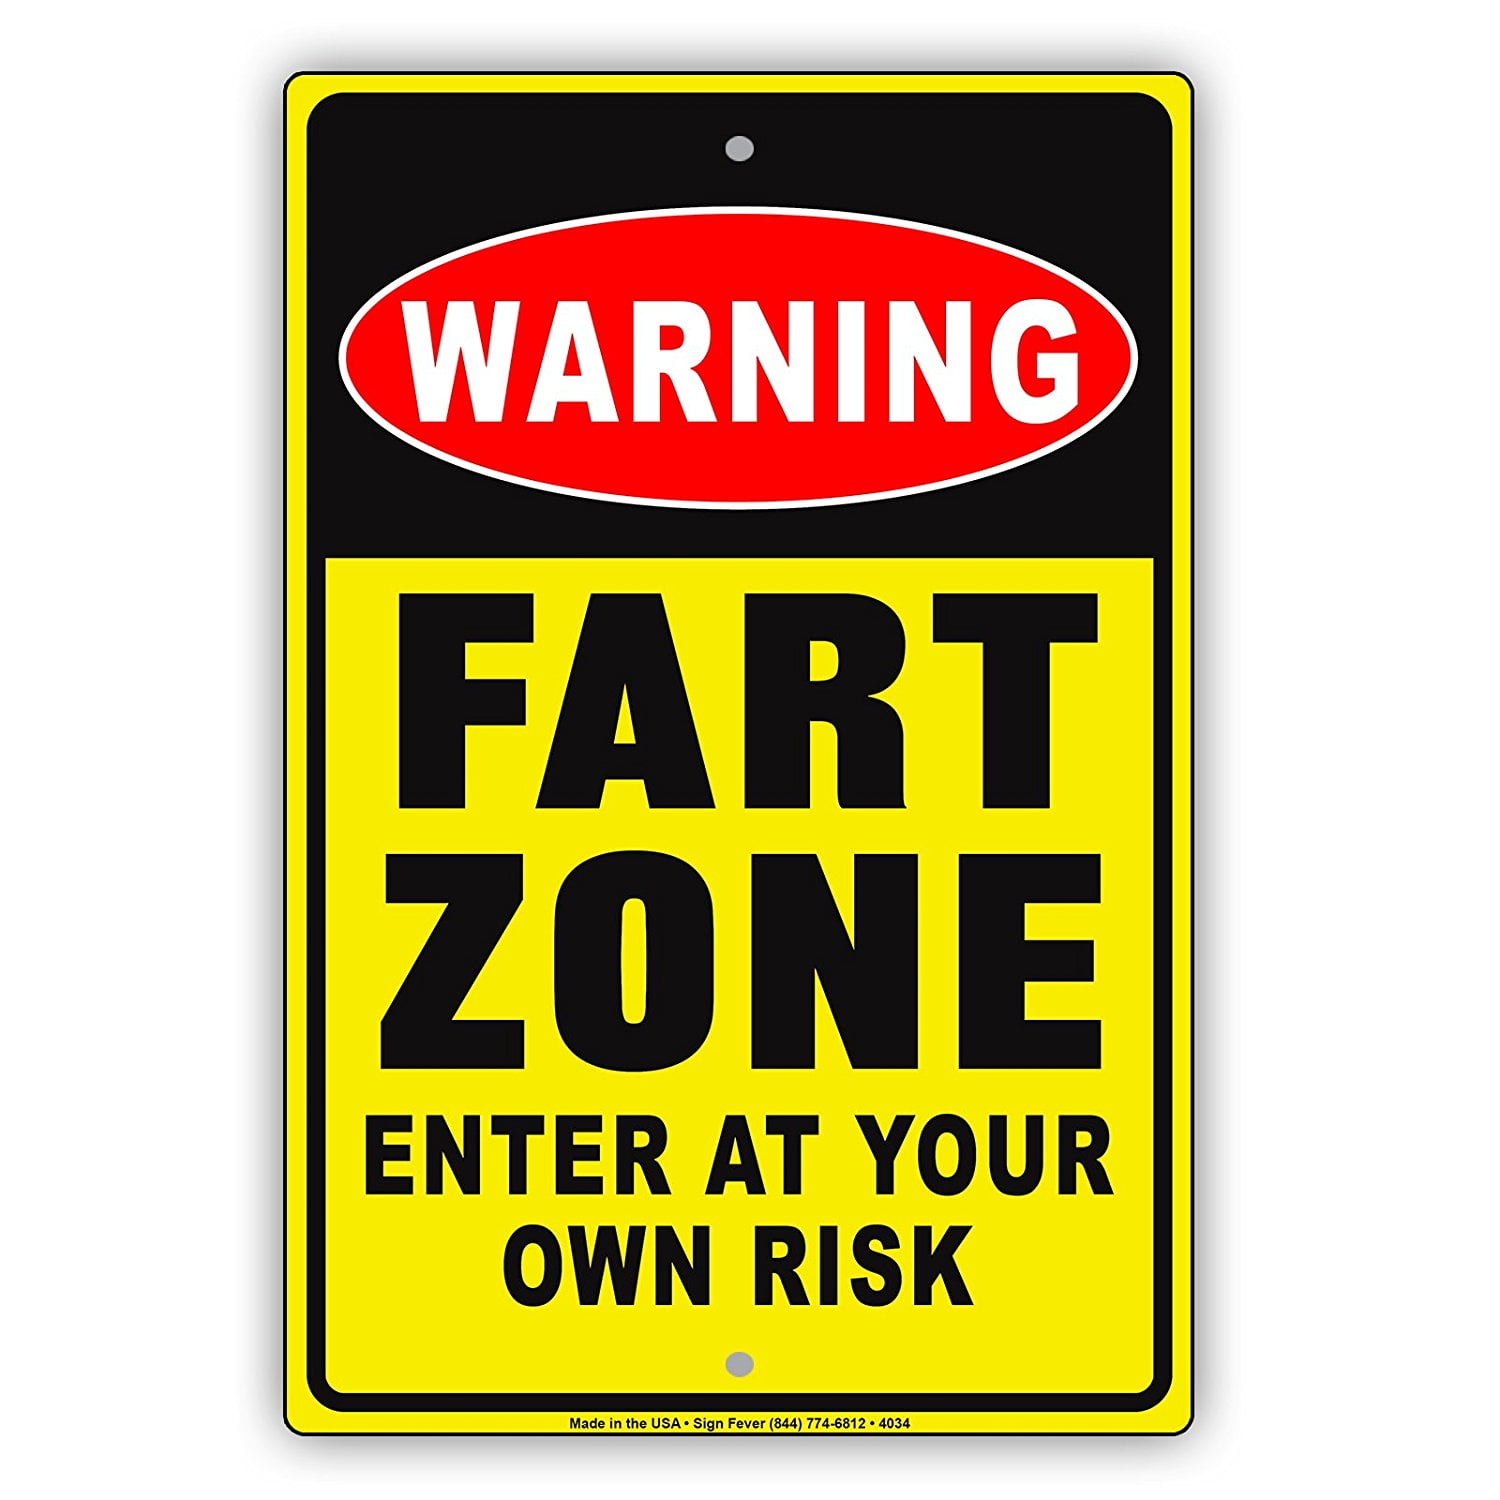 Yellow backgr 8" x 12" Metal Tin Sign WARNING FART ZONE ENTER AT YOUR OWN RISK